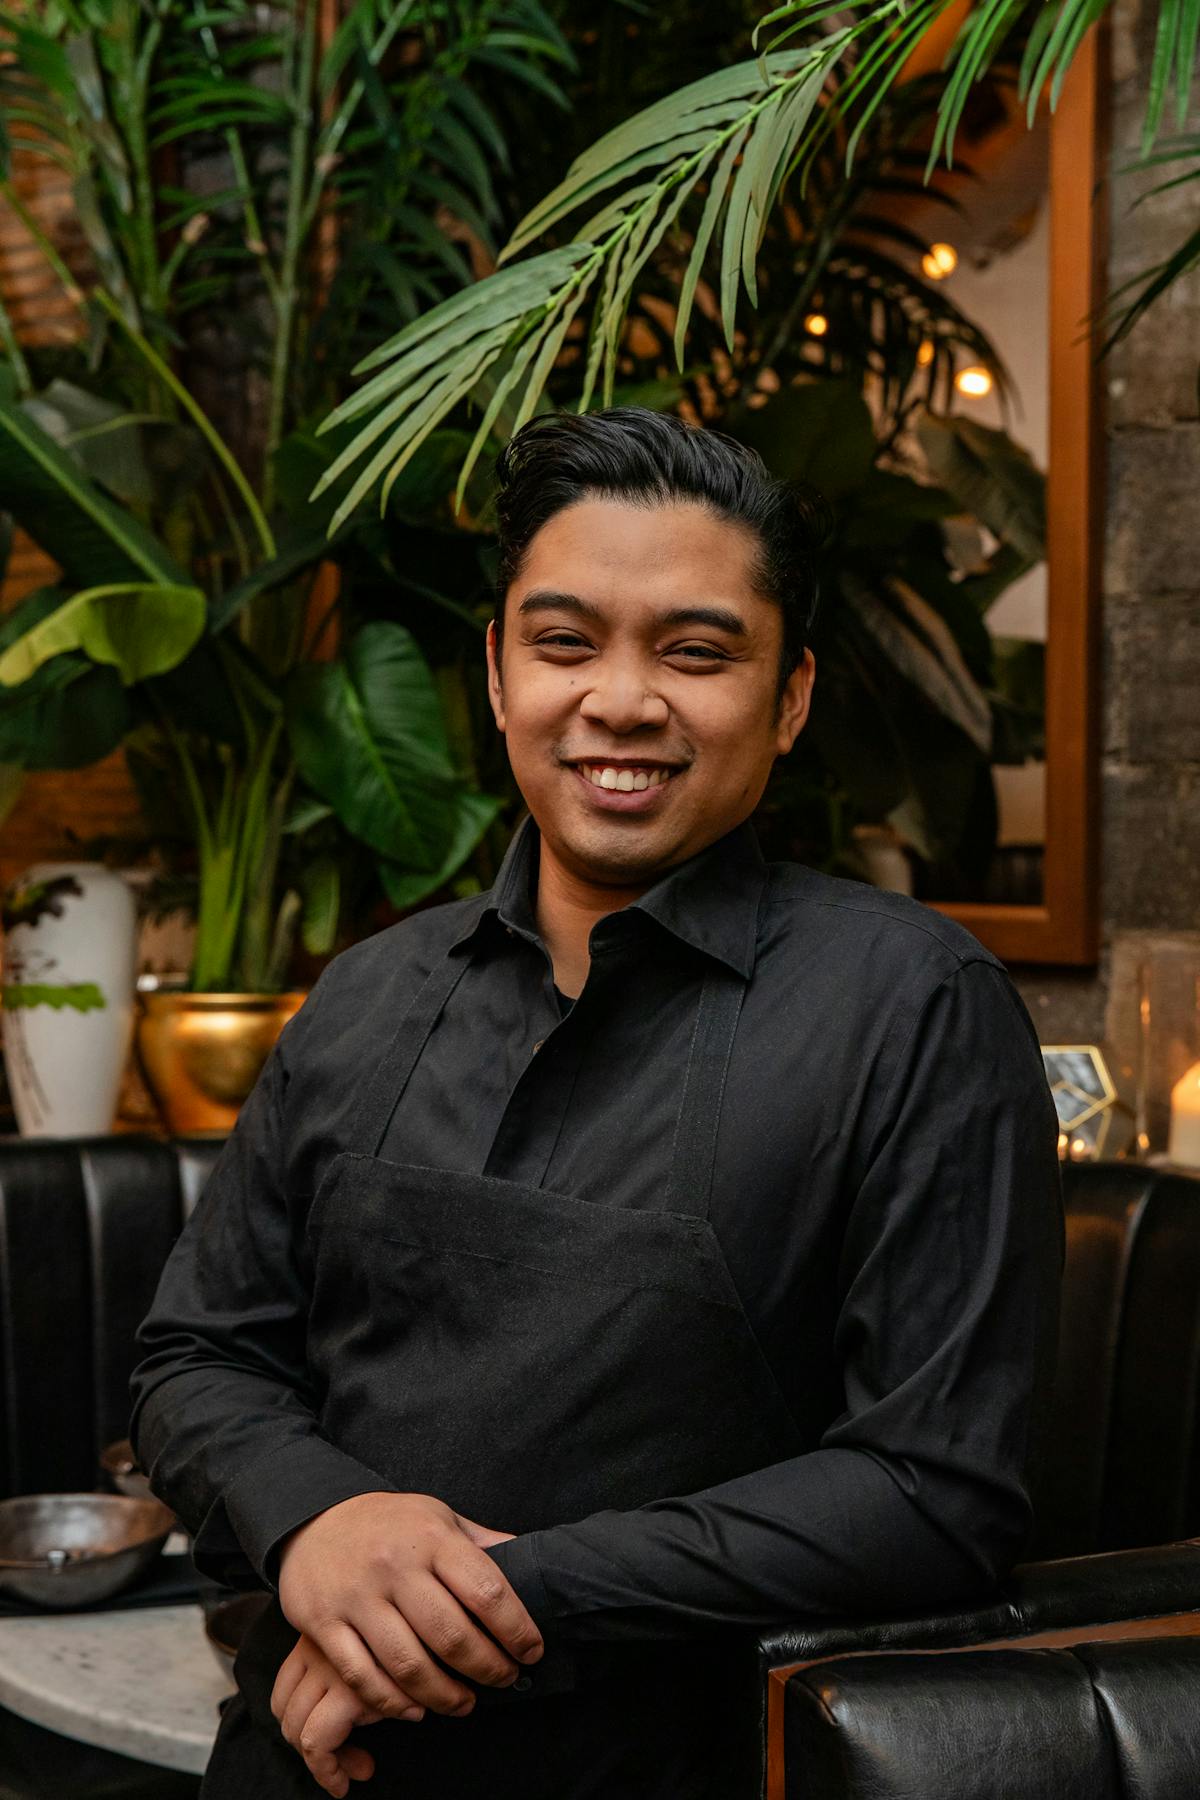 a man with short hair wearing a black apron smiling